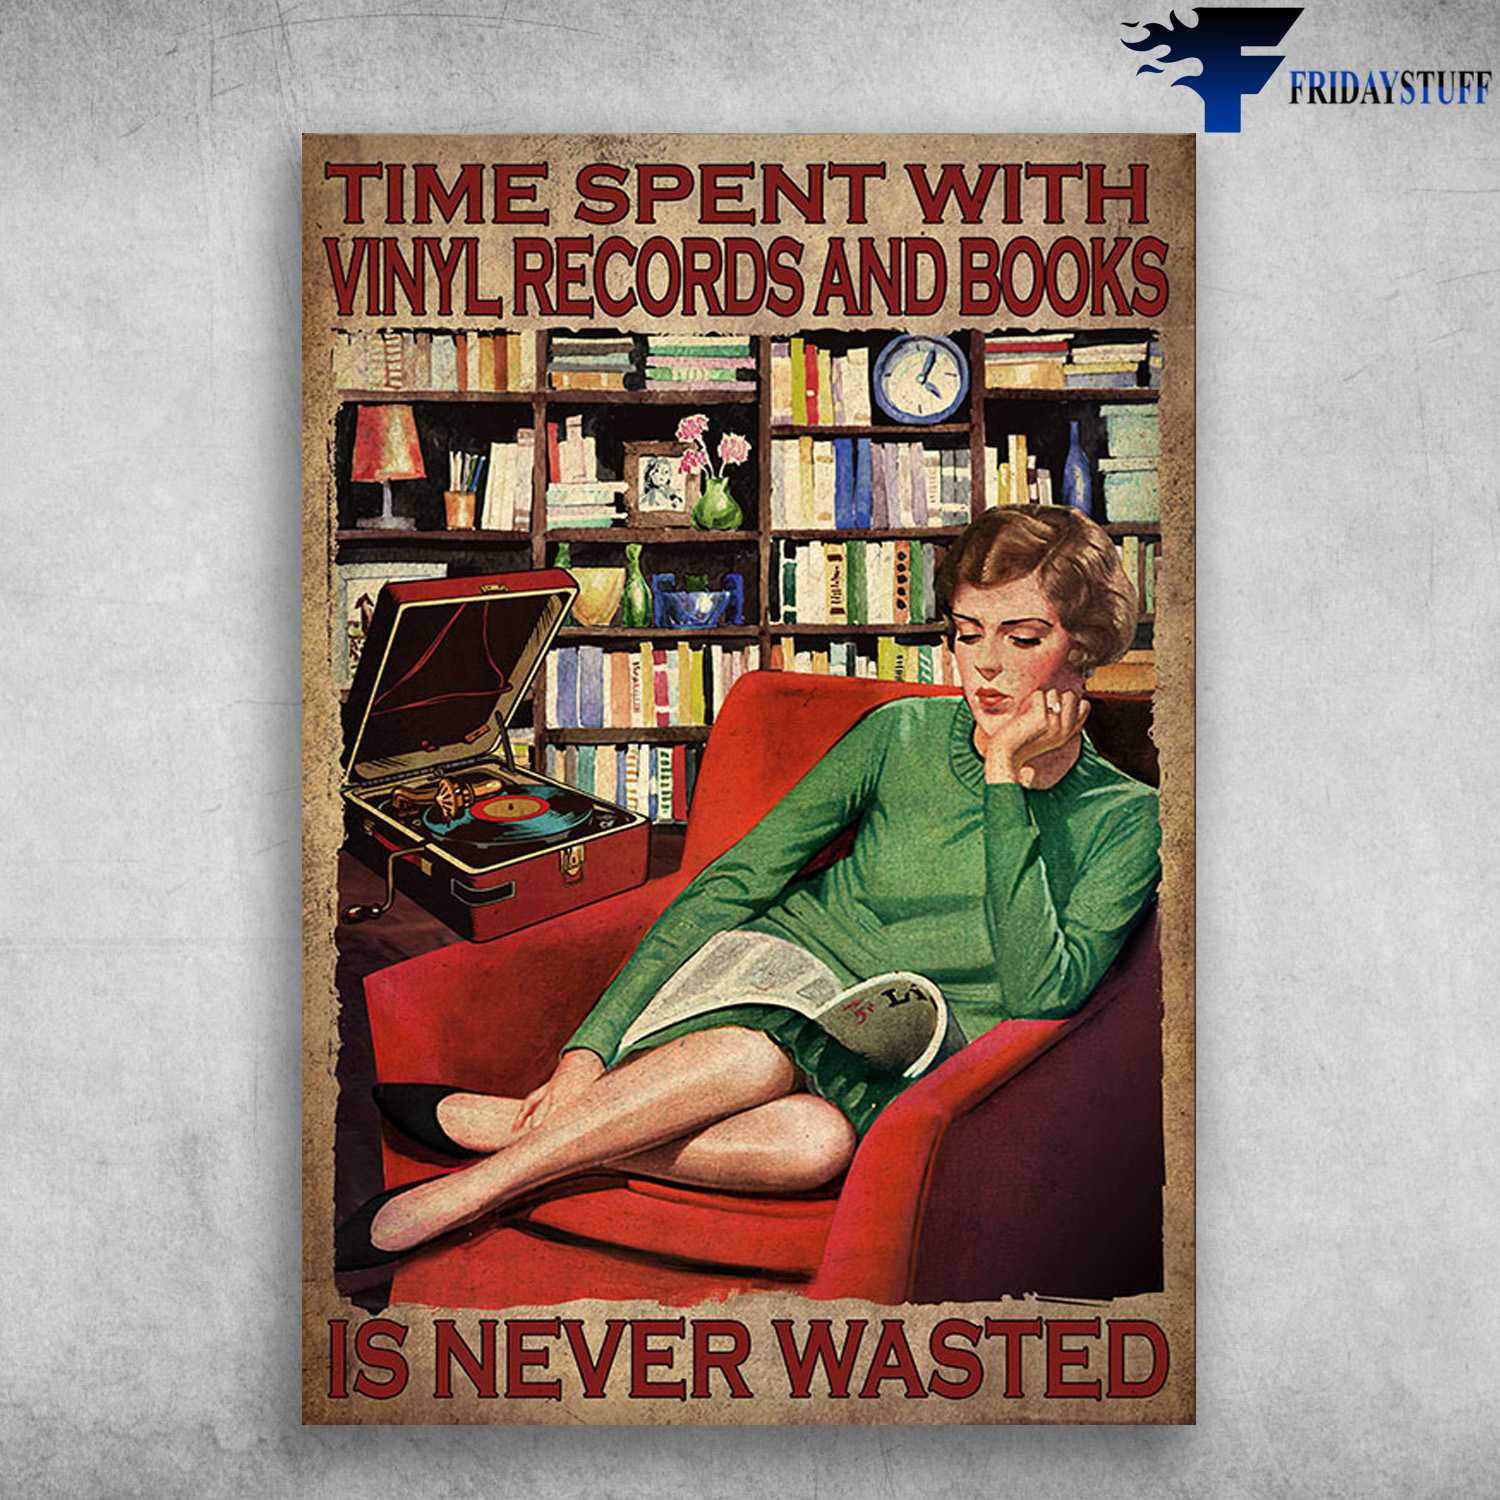 Girl Reads Book, Vinyl Book - Time Spent With, Vinyl Records And Books, Is Never Wasted